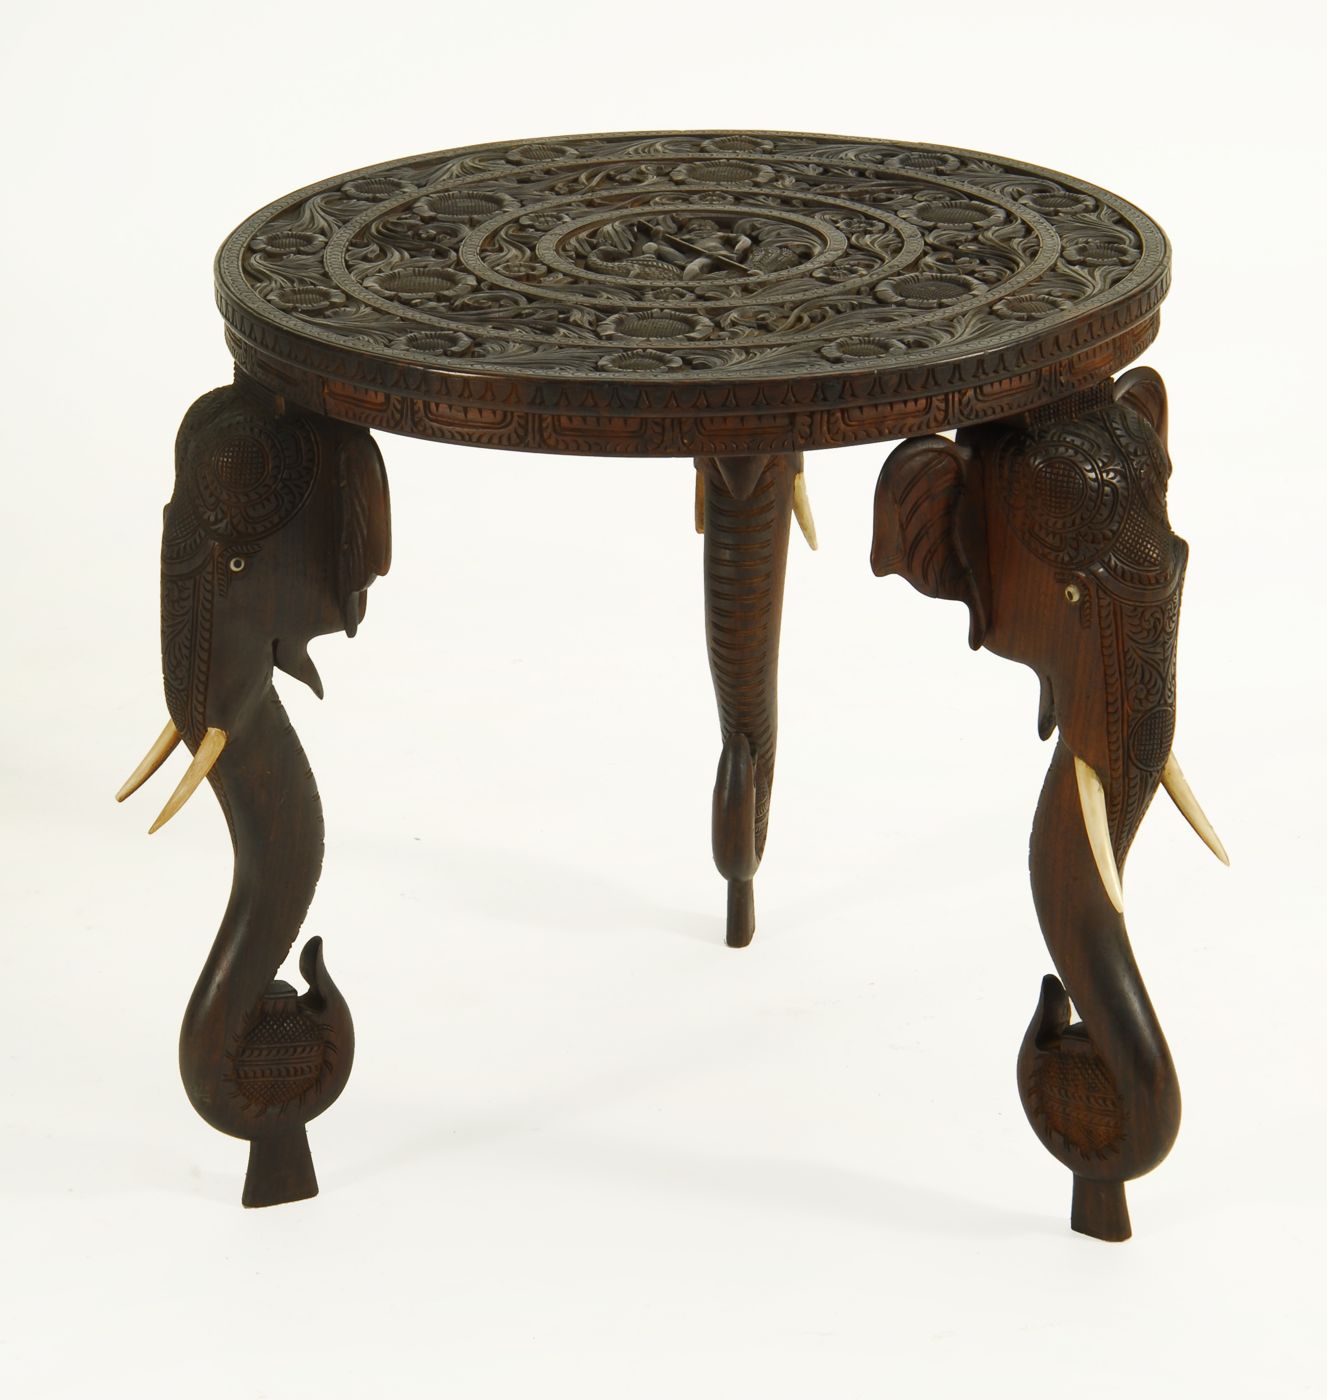 ANGLO INDIAN ROUND CENTER TABLE 14b4dd